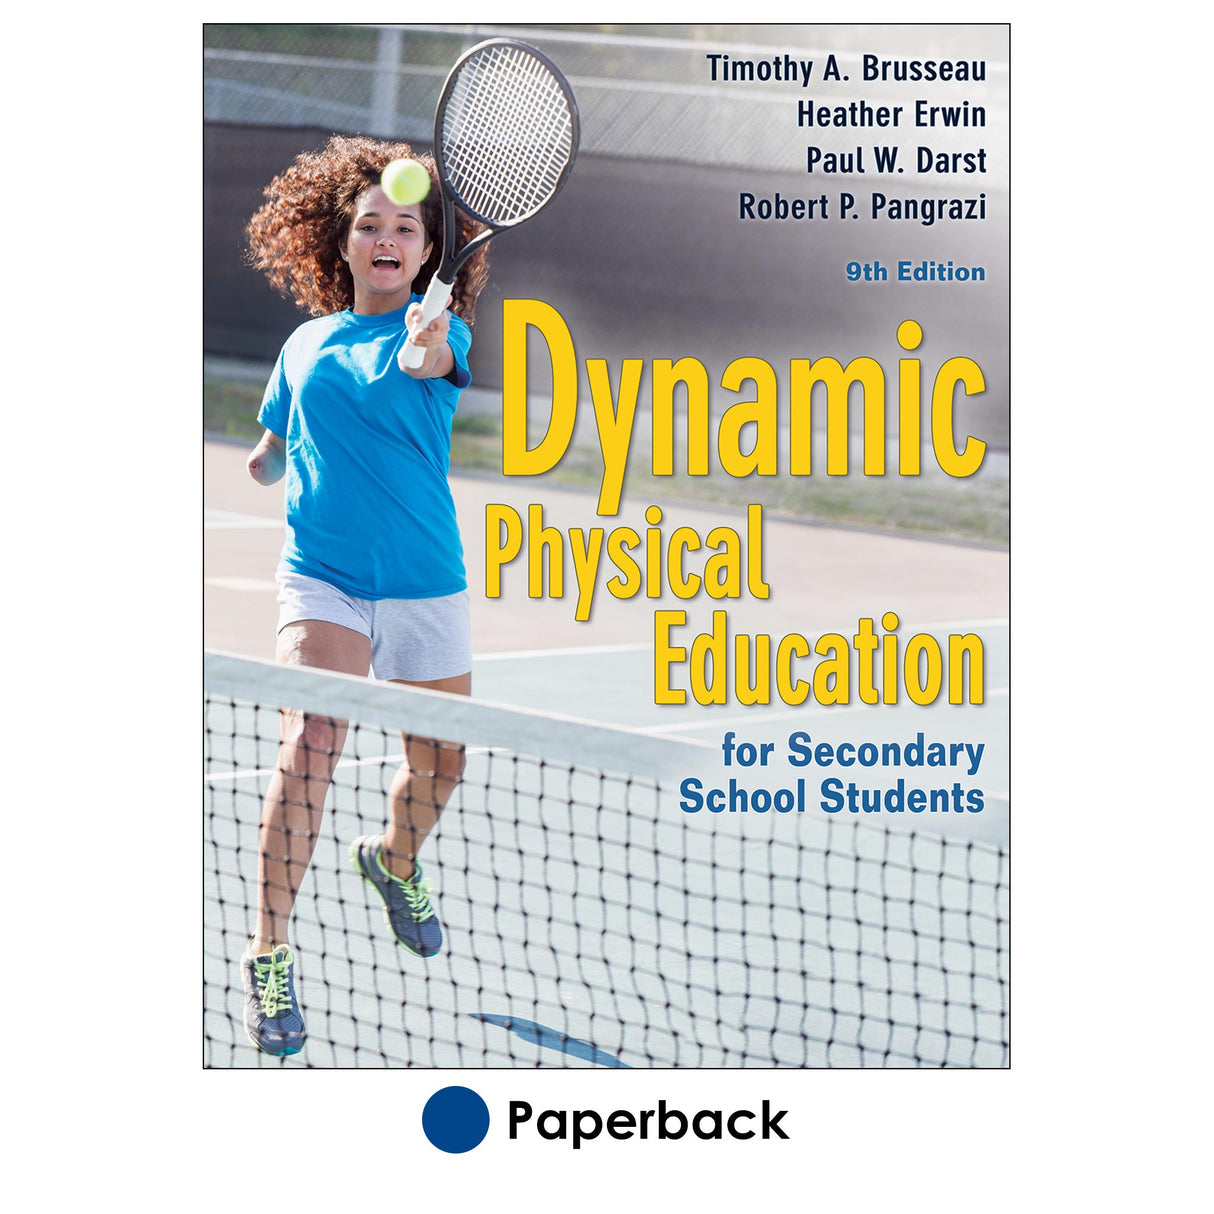 Dynamic Physical Education for Secondary School Students-9th Edition